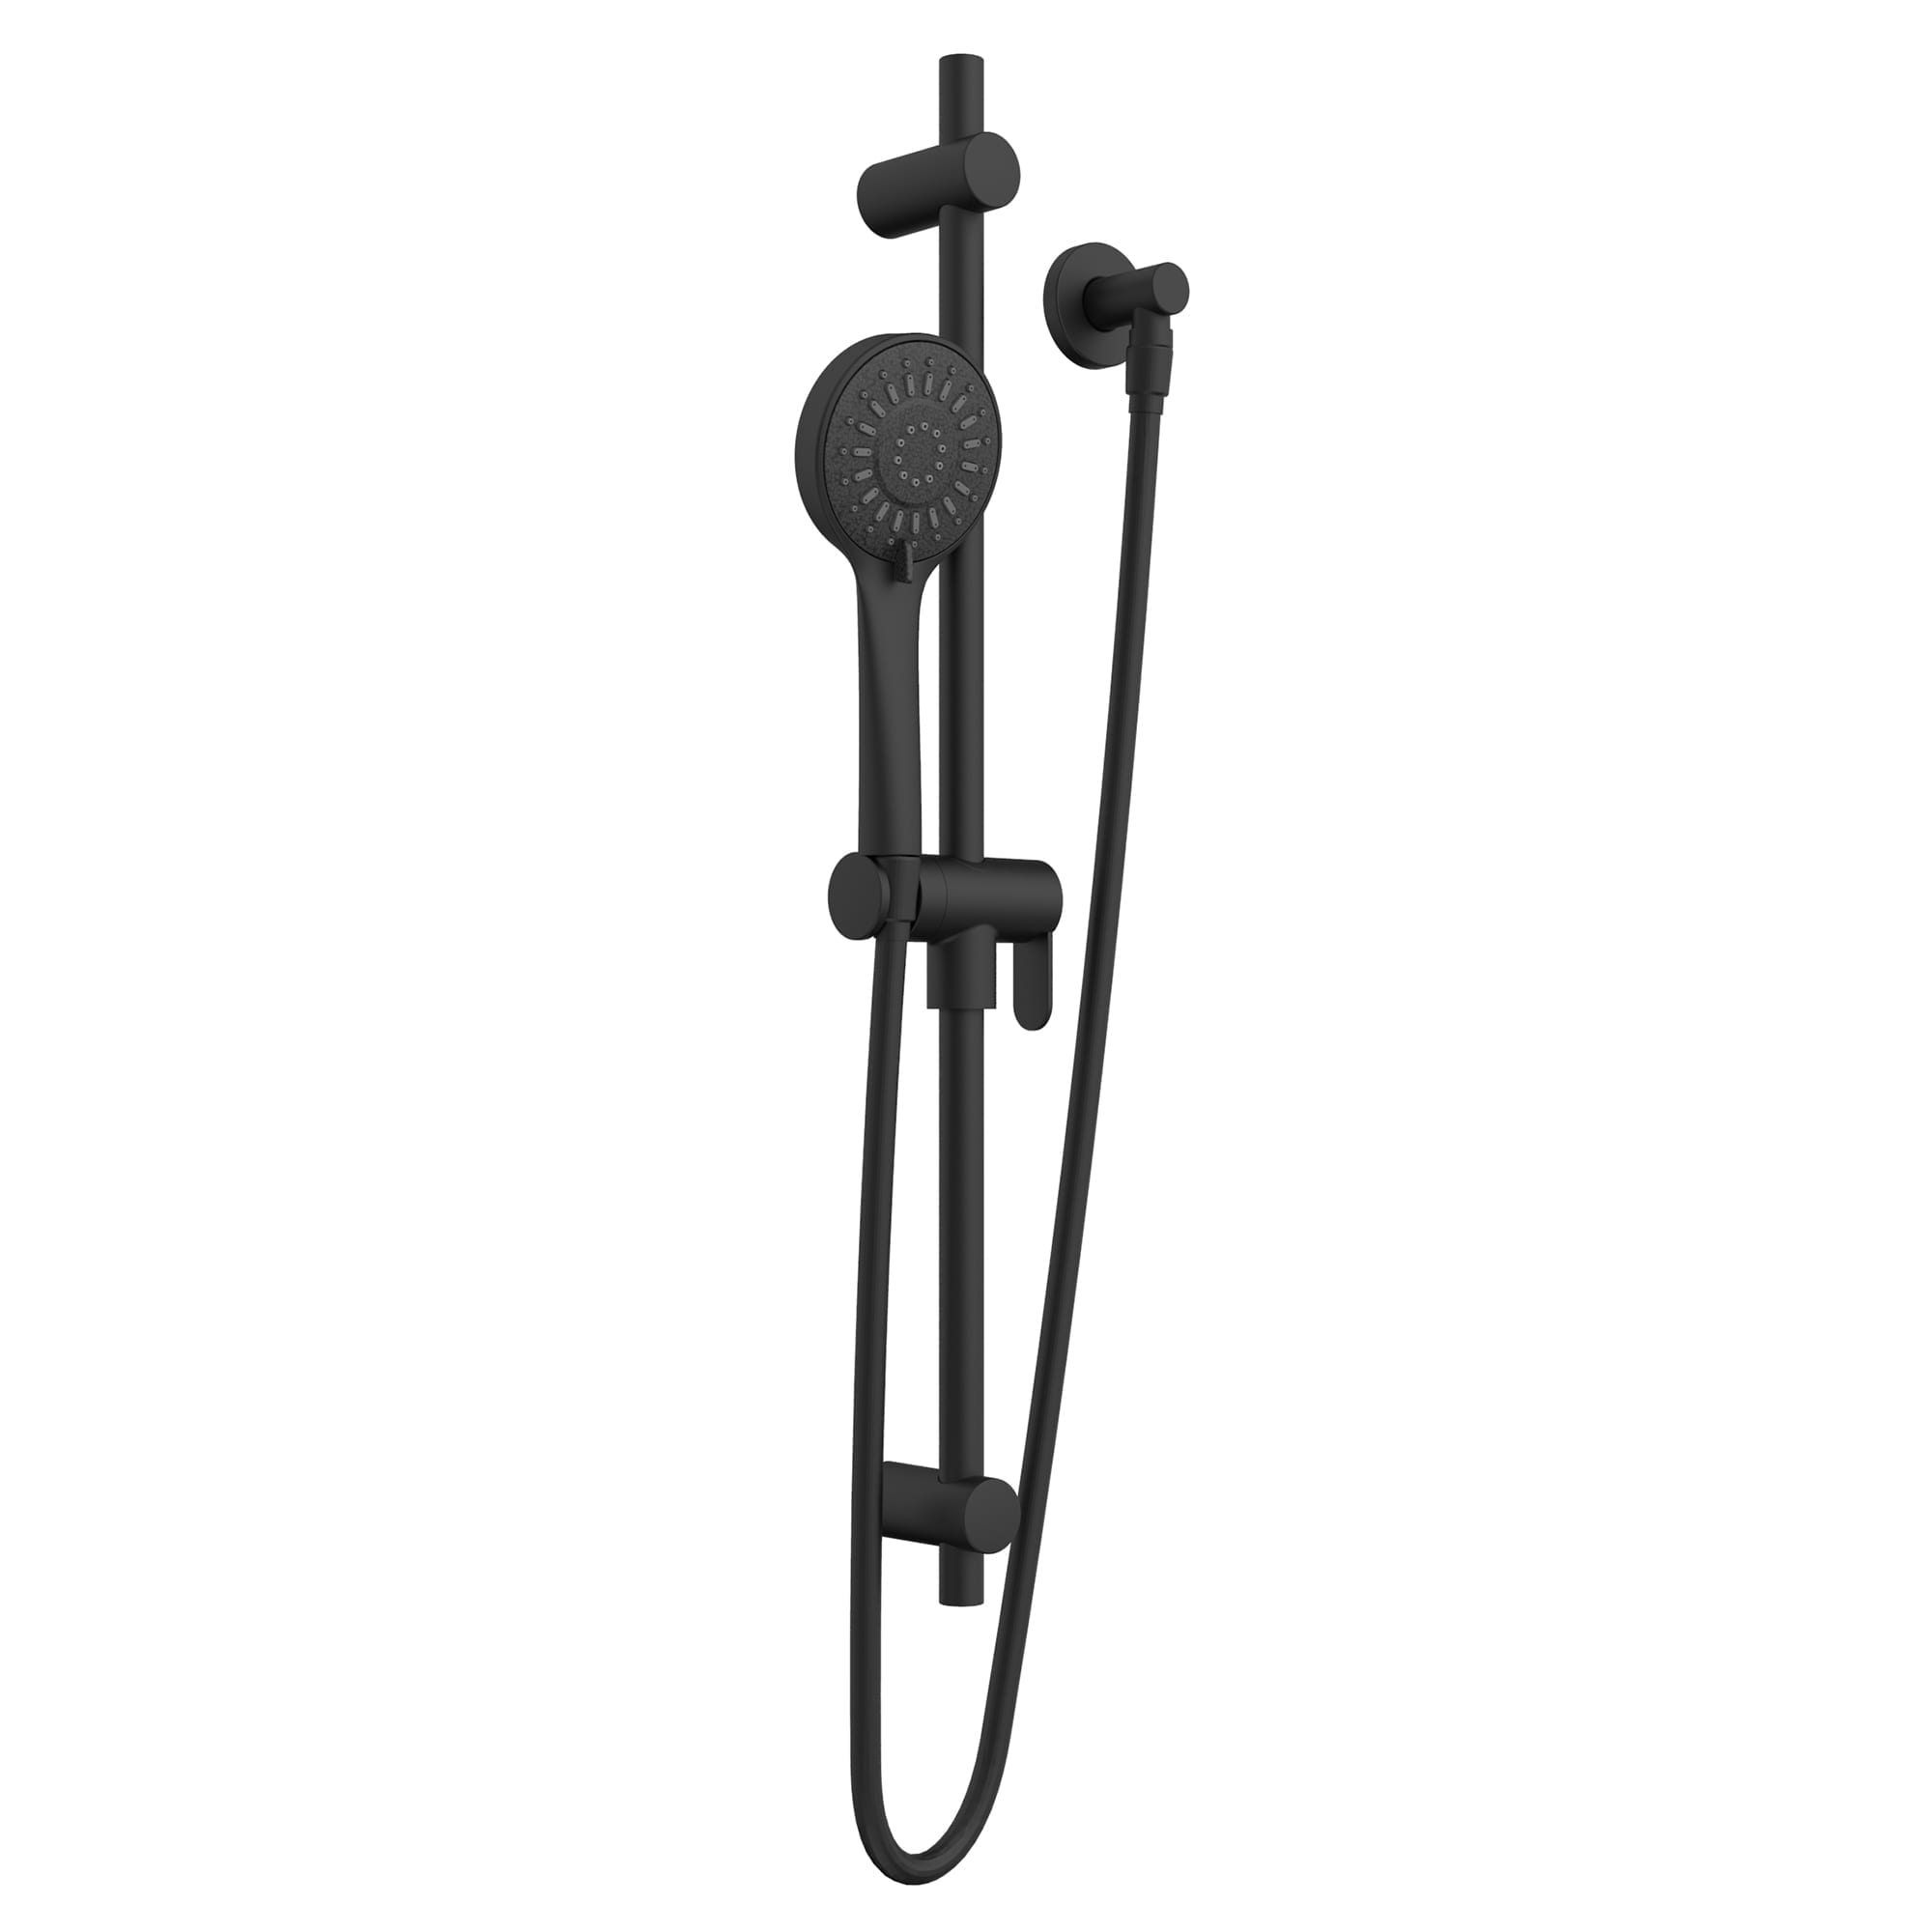 Bélanger B90-732MB- Sliding Bar Kit (Round) With Multi-Function Hand Shower, Water Supply Elbow And Flexible Hose